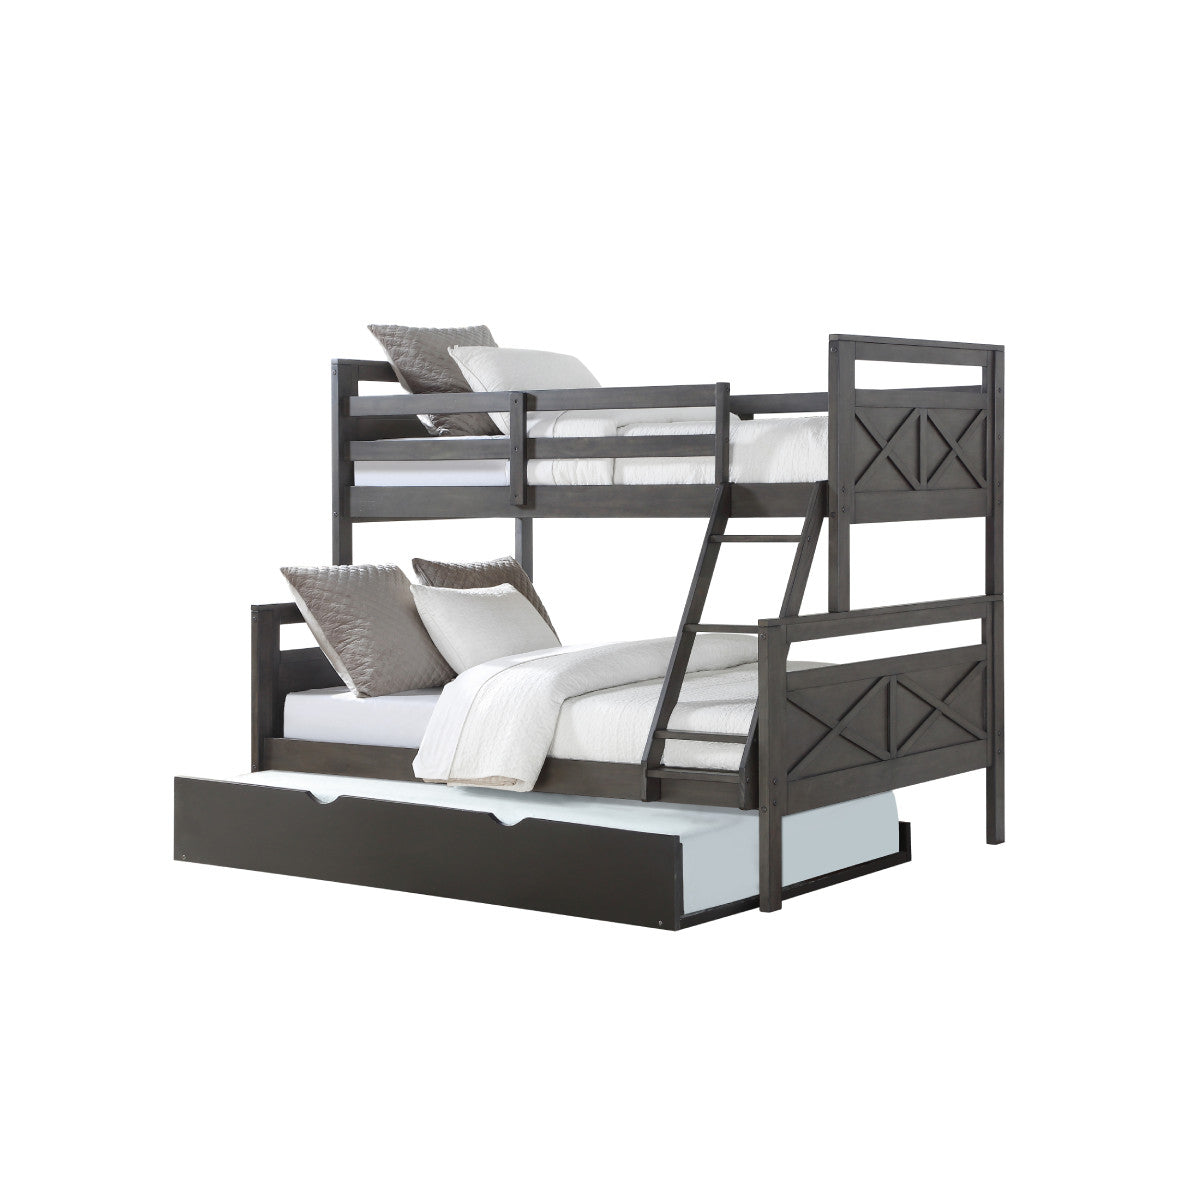 TWIN/FULL BUNK BED RUSTIC GREY FINISH WITH TWIN TRUNDLE BED IN LOW SHEEN BLACK FINISH